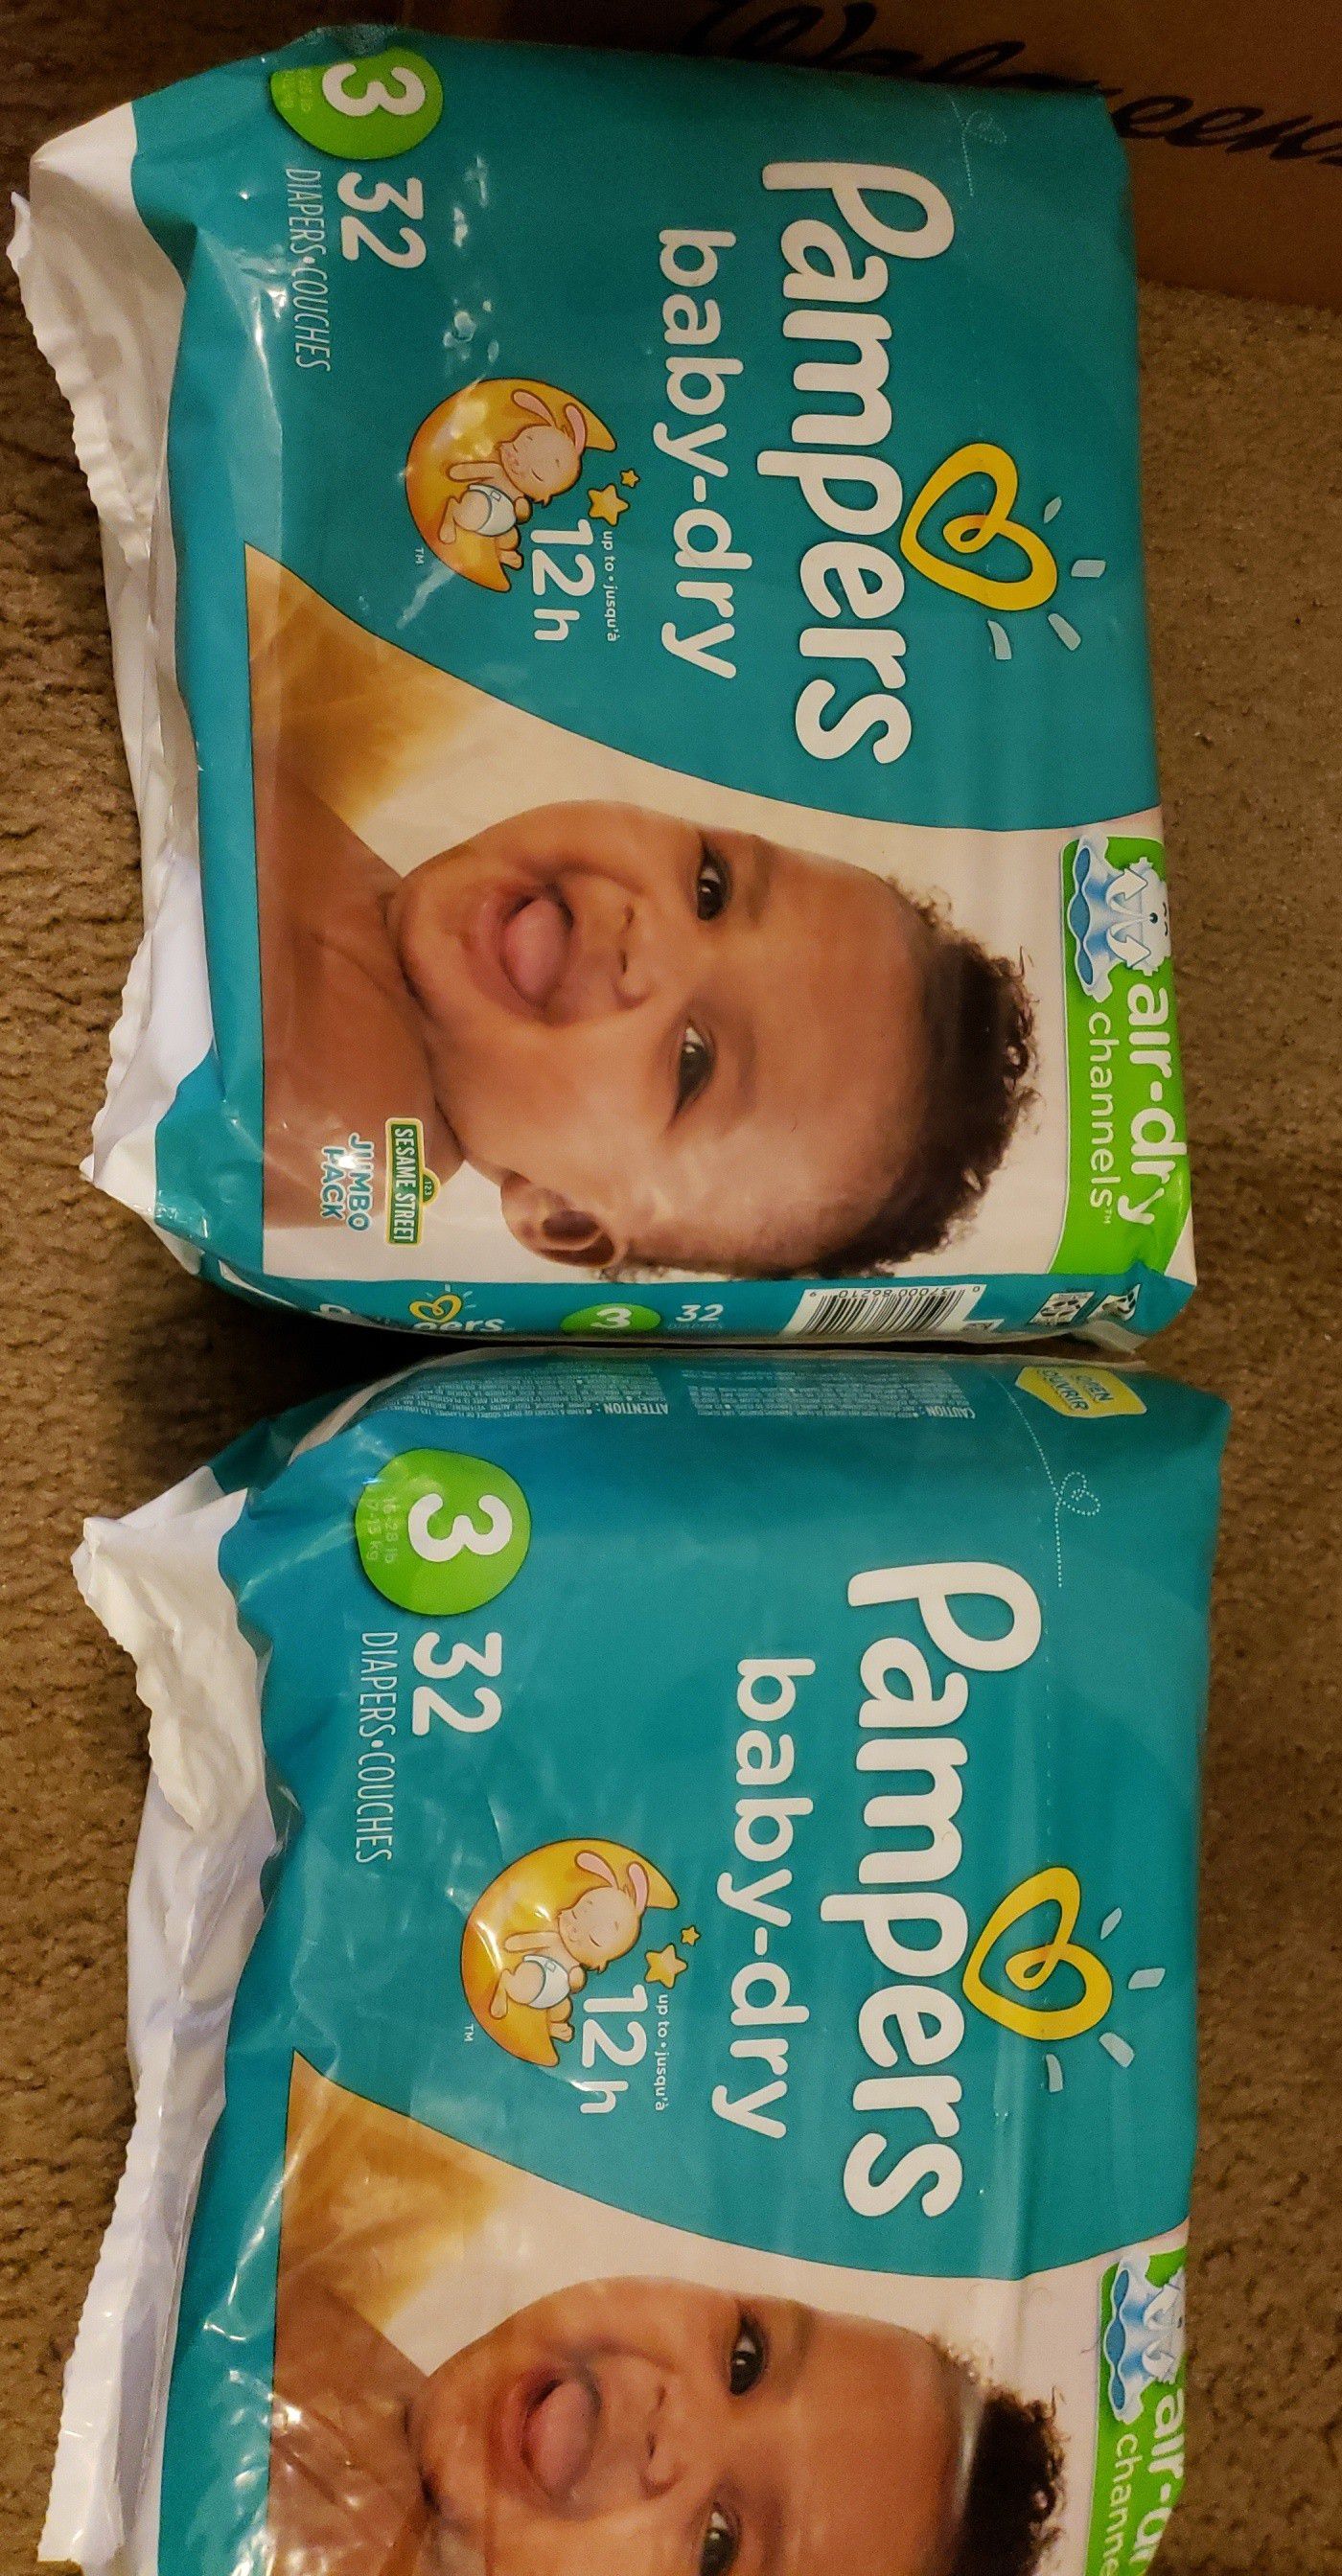 Pampers size 3